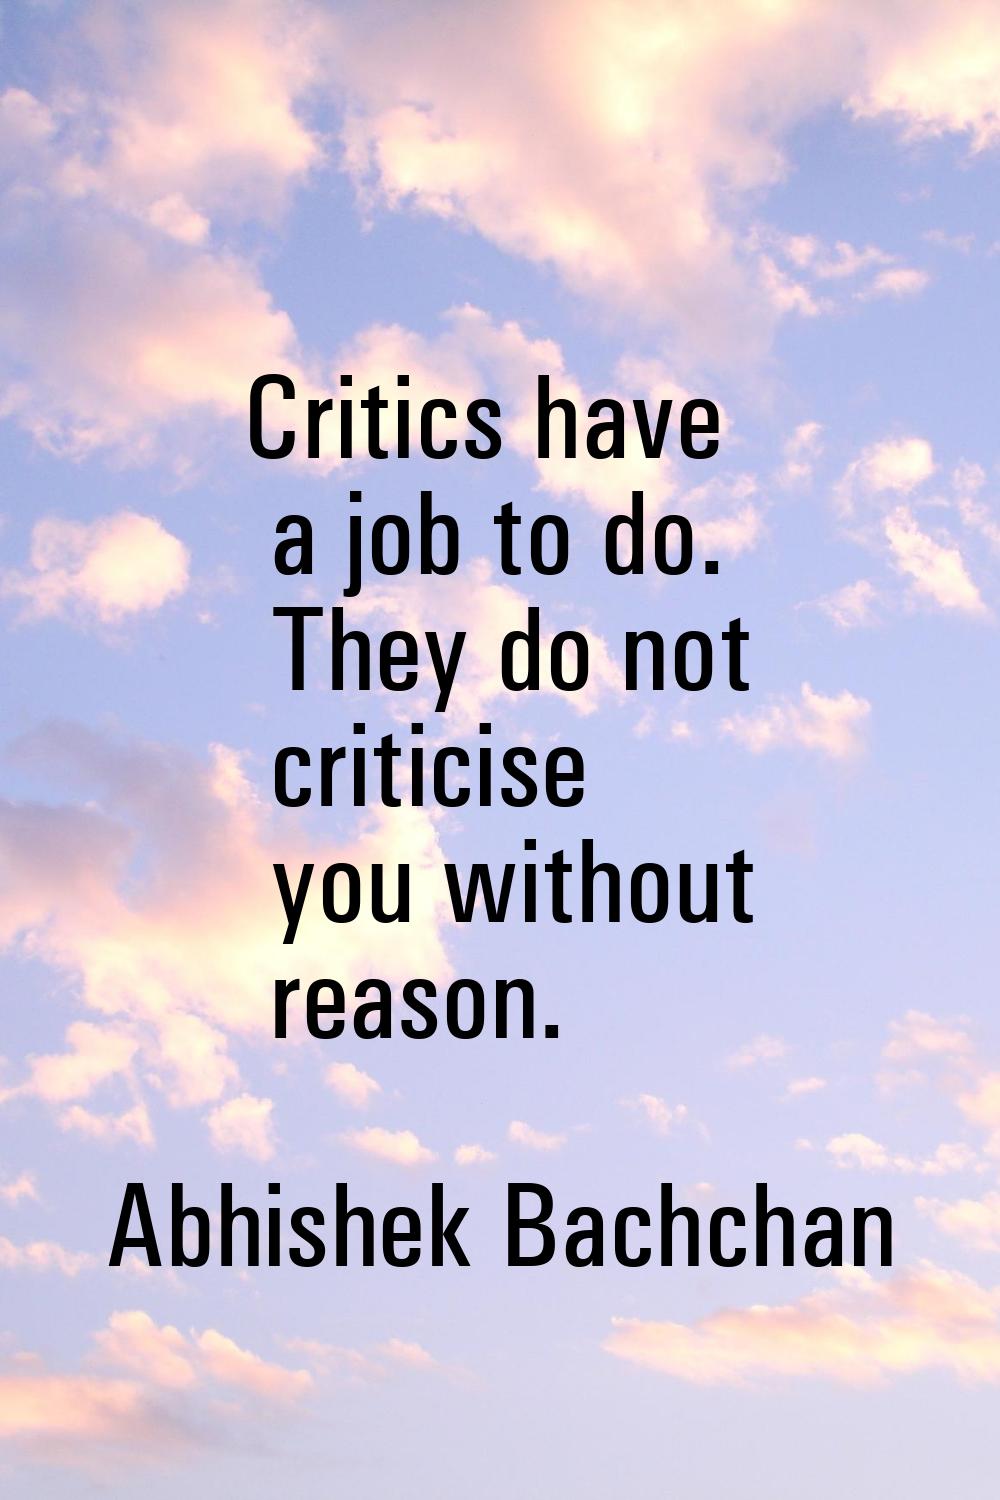 Critics have a job to do. They do not criticise you without reason.